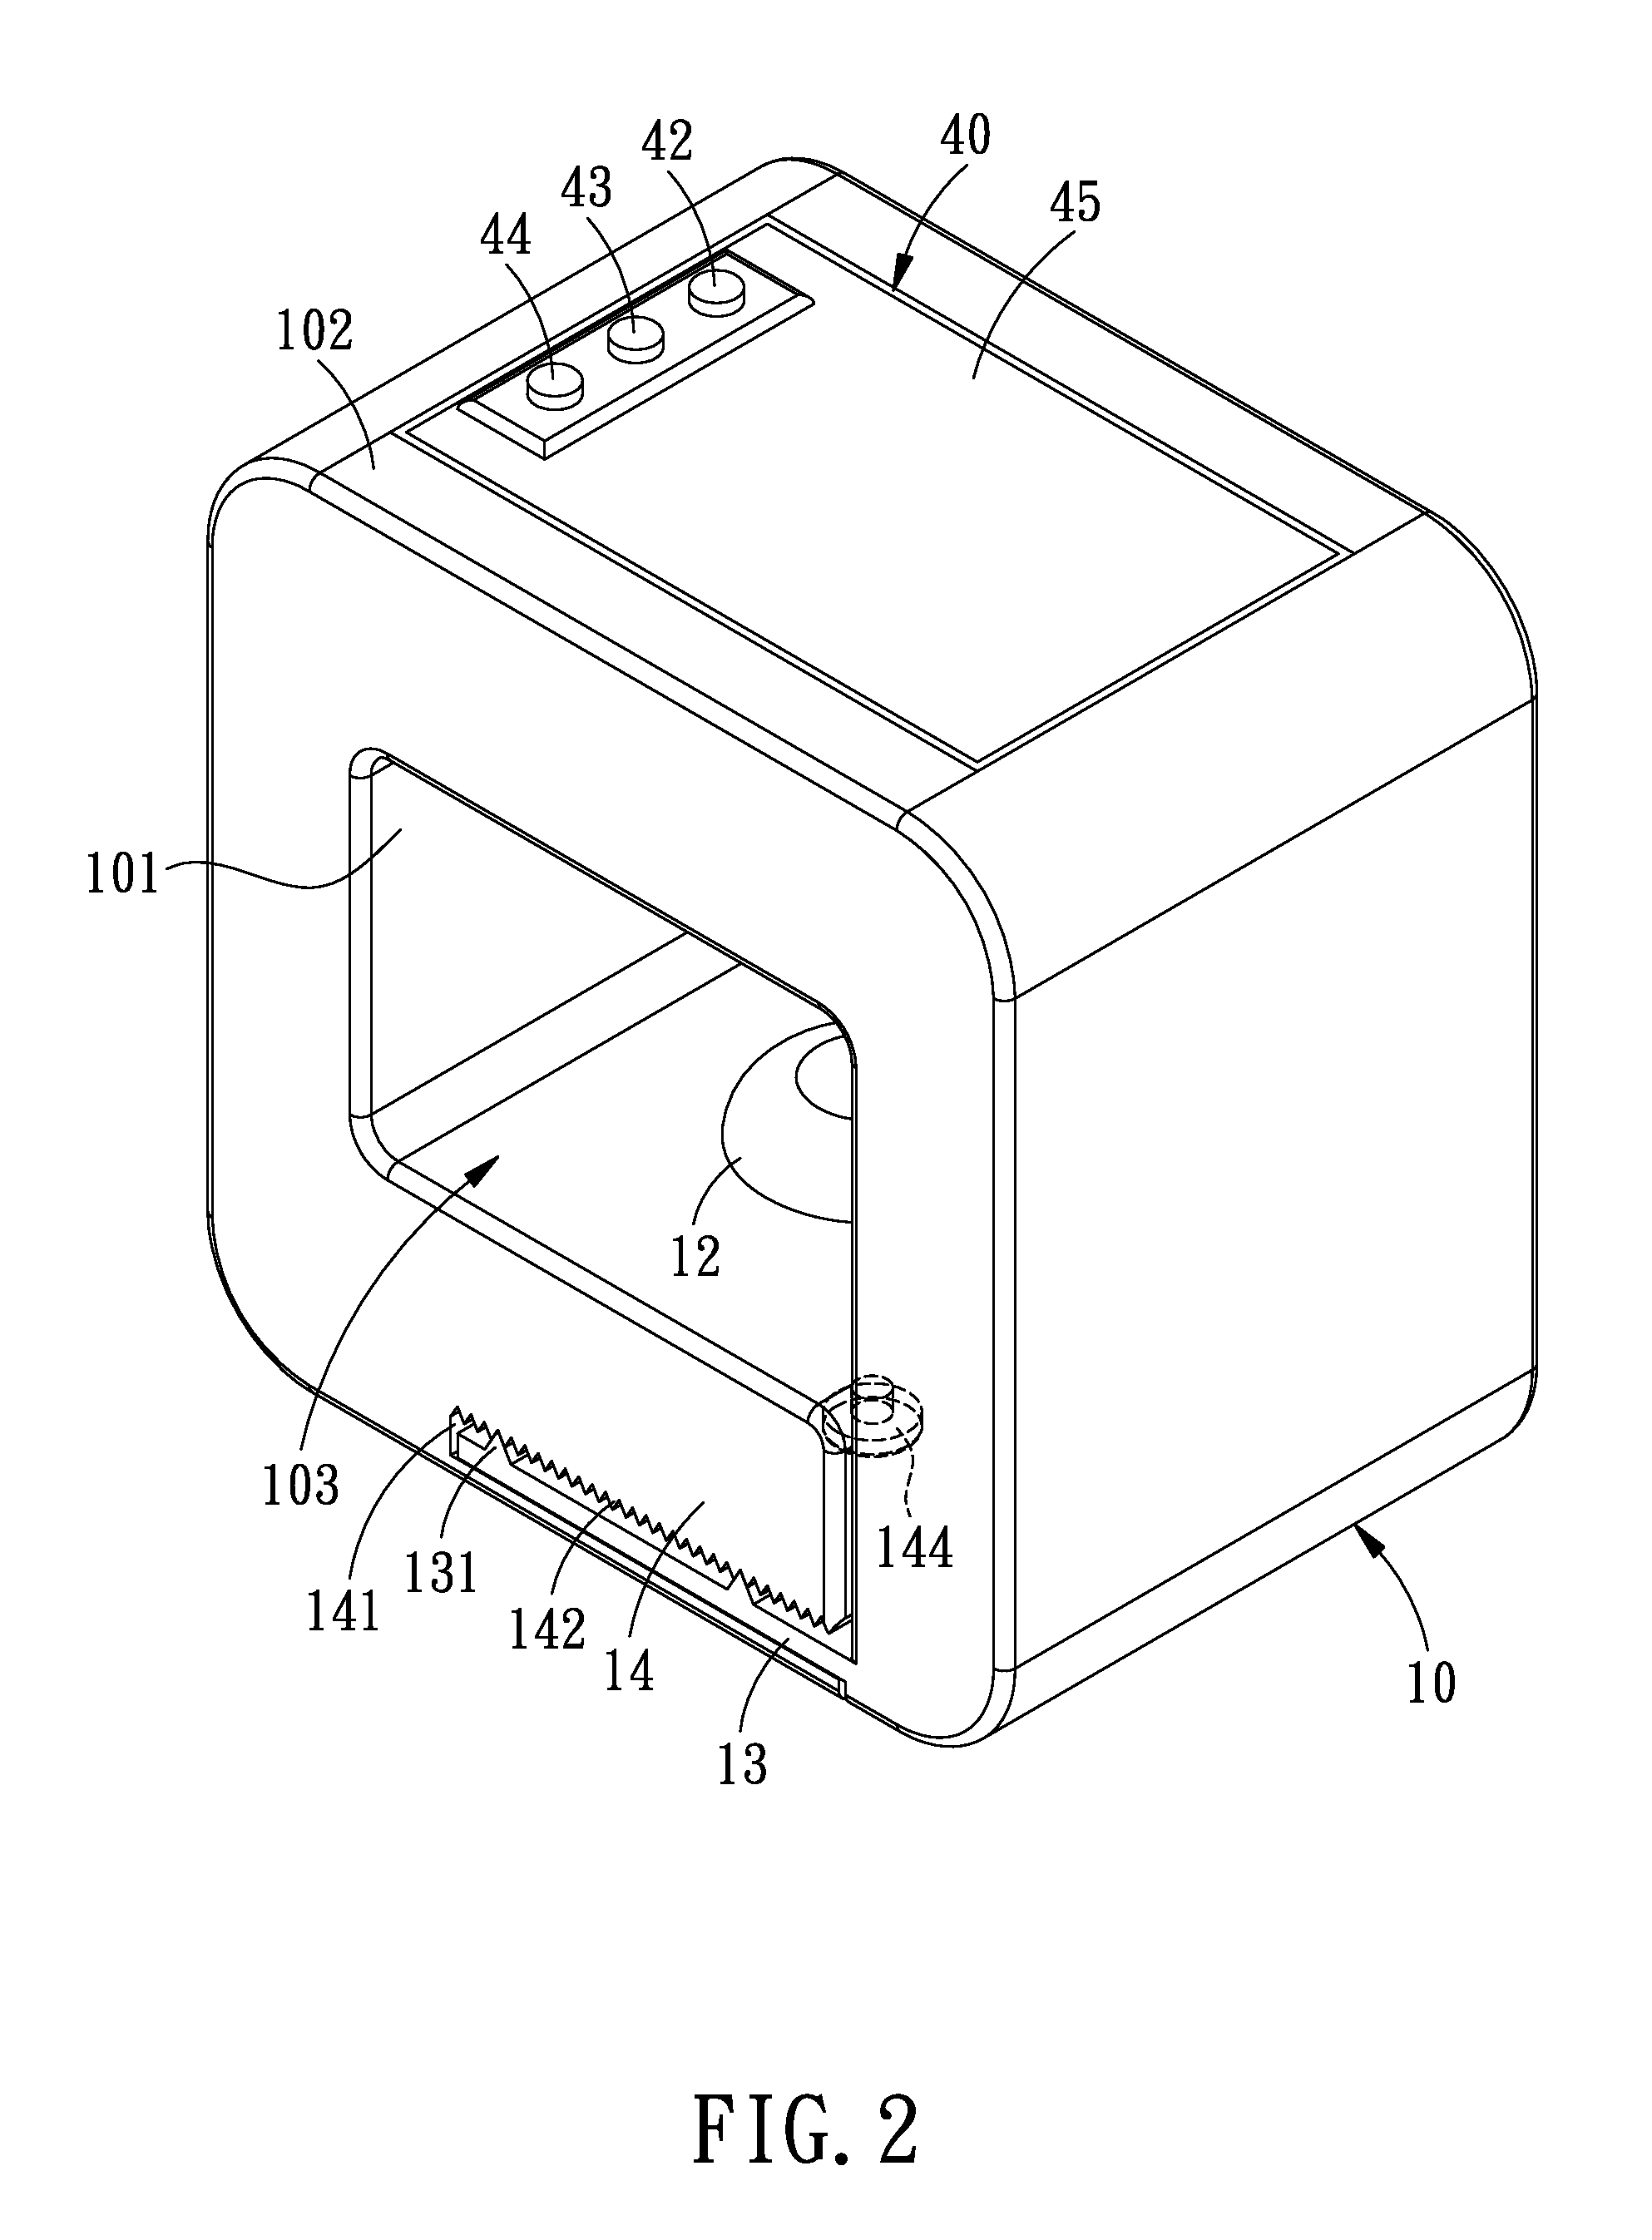 Resonance massage device and method for massaging the acupuncture points on the wrist